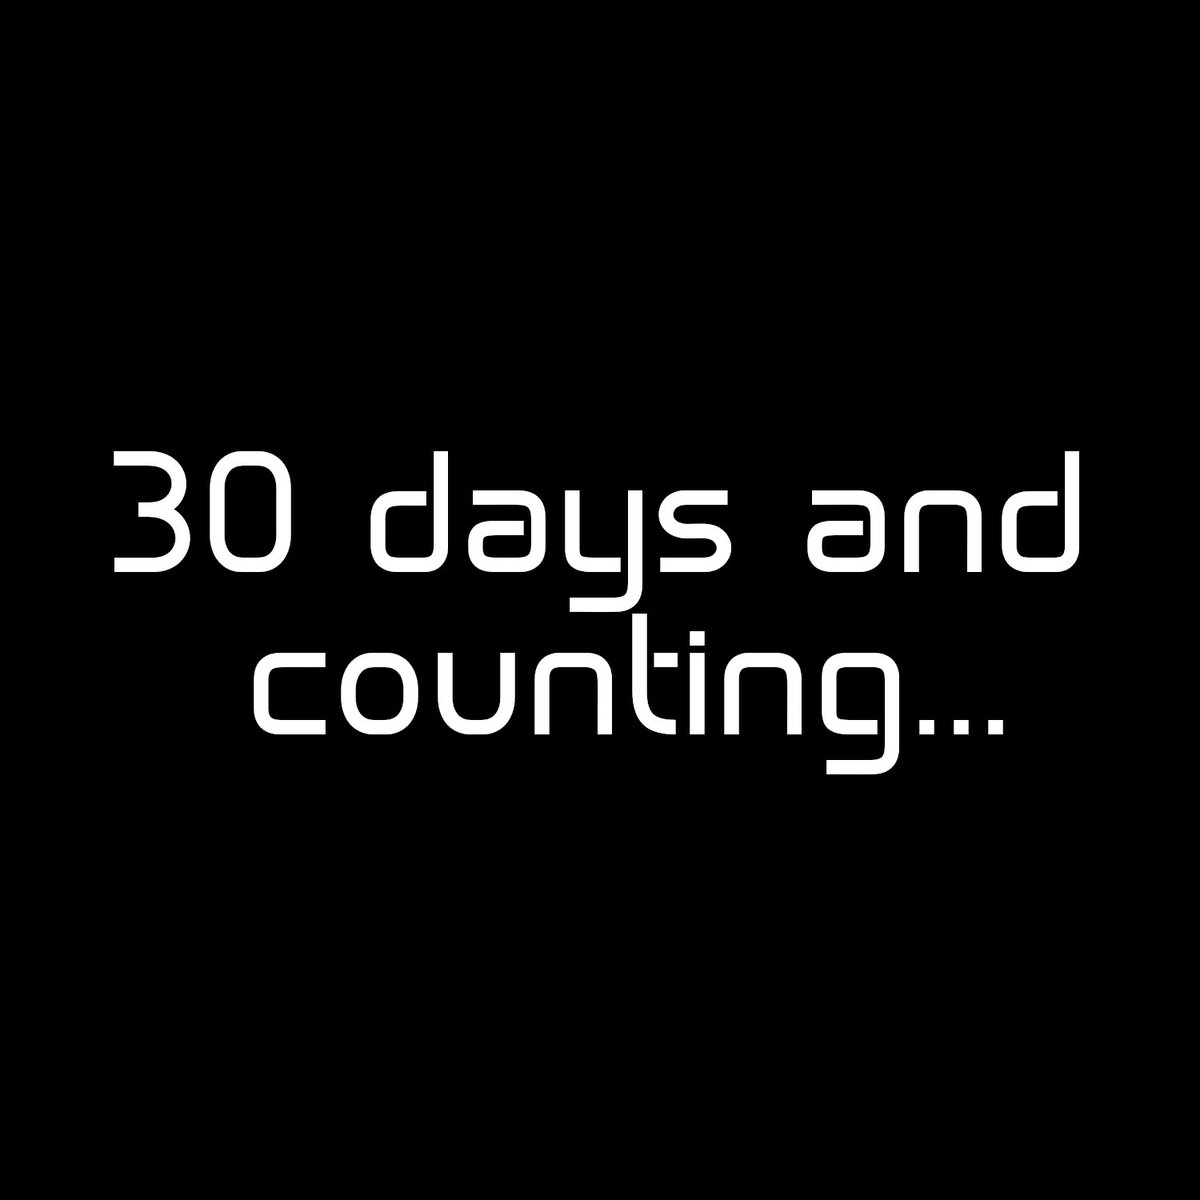 30 days until the release of Supernature, the new album from Dream Factory.

#vsoundproductions #syntopianstudios #dreamfactory #DJ #electronicmusic #chilloutmusic #downtempomusic #tangerinedream #vangelis #jeanmicheljarre #dancemusic #delerium #enigmamusic #tycho